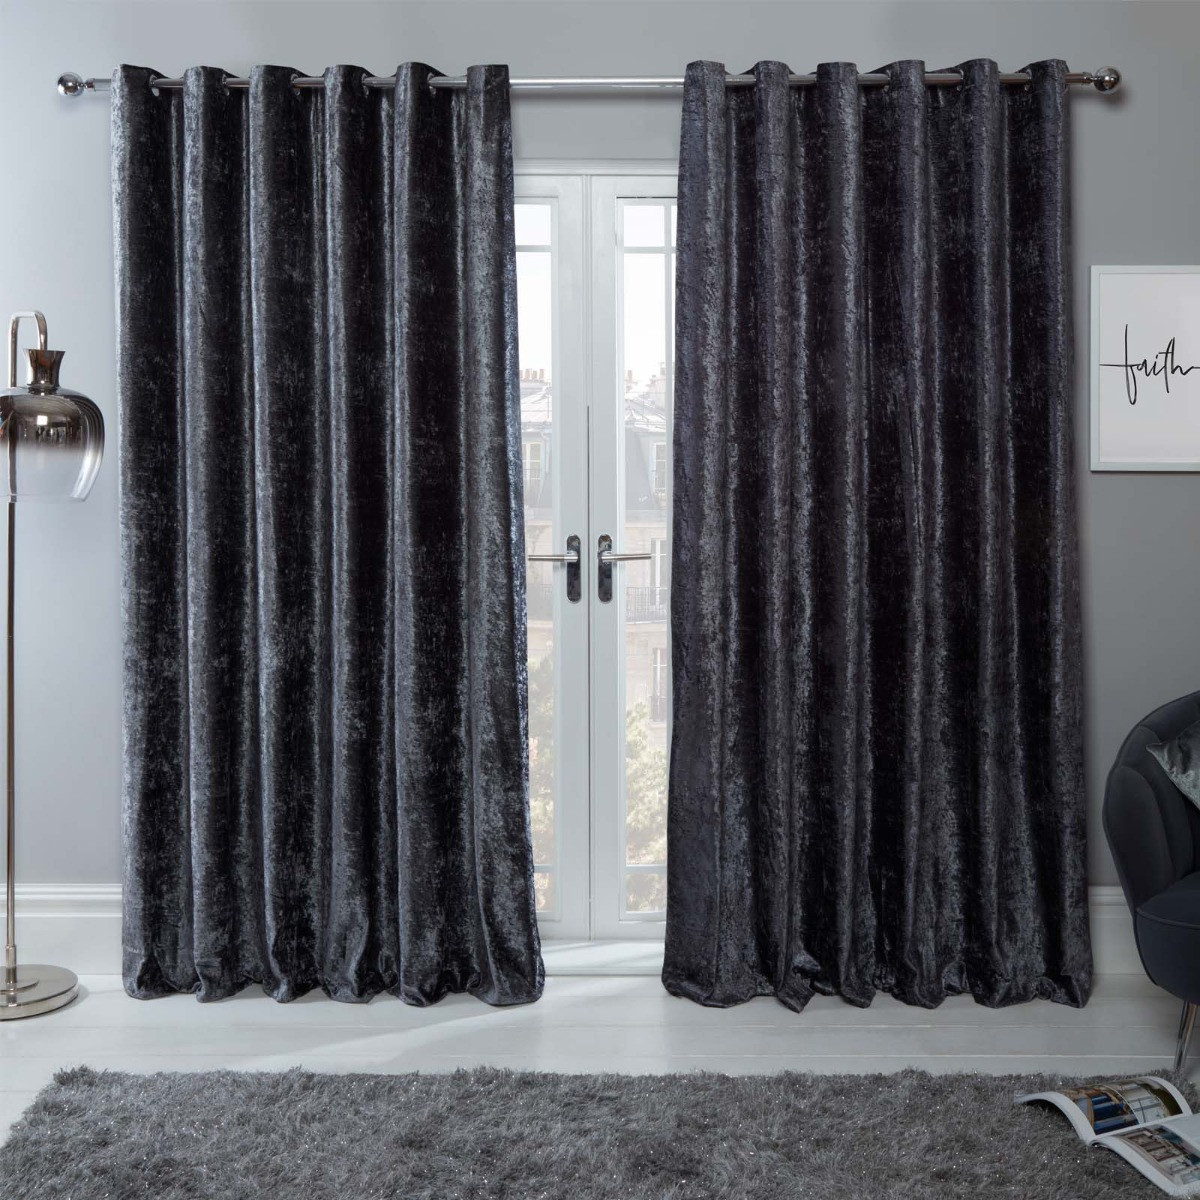 Sienna Home Crushed Velvet Eyelet Curtains - Charcoal Grey 46" x 72">